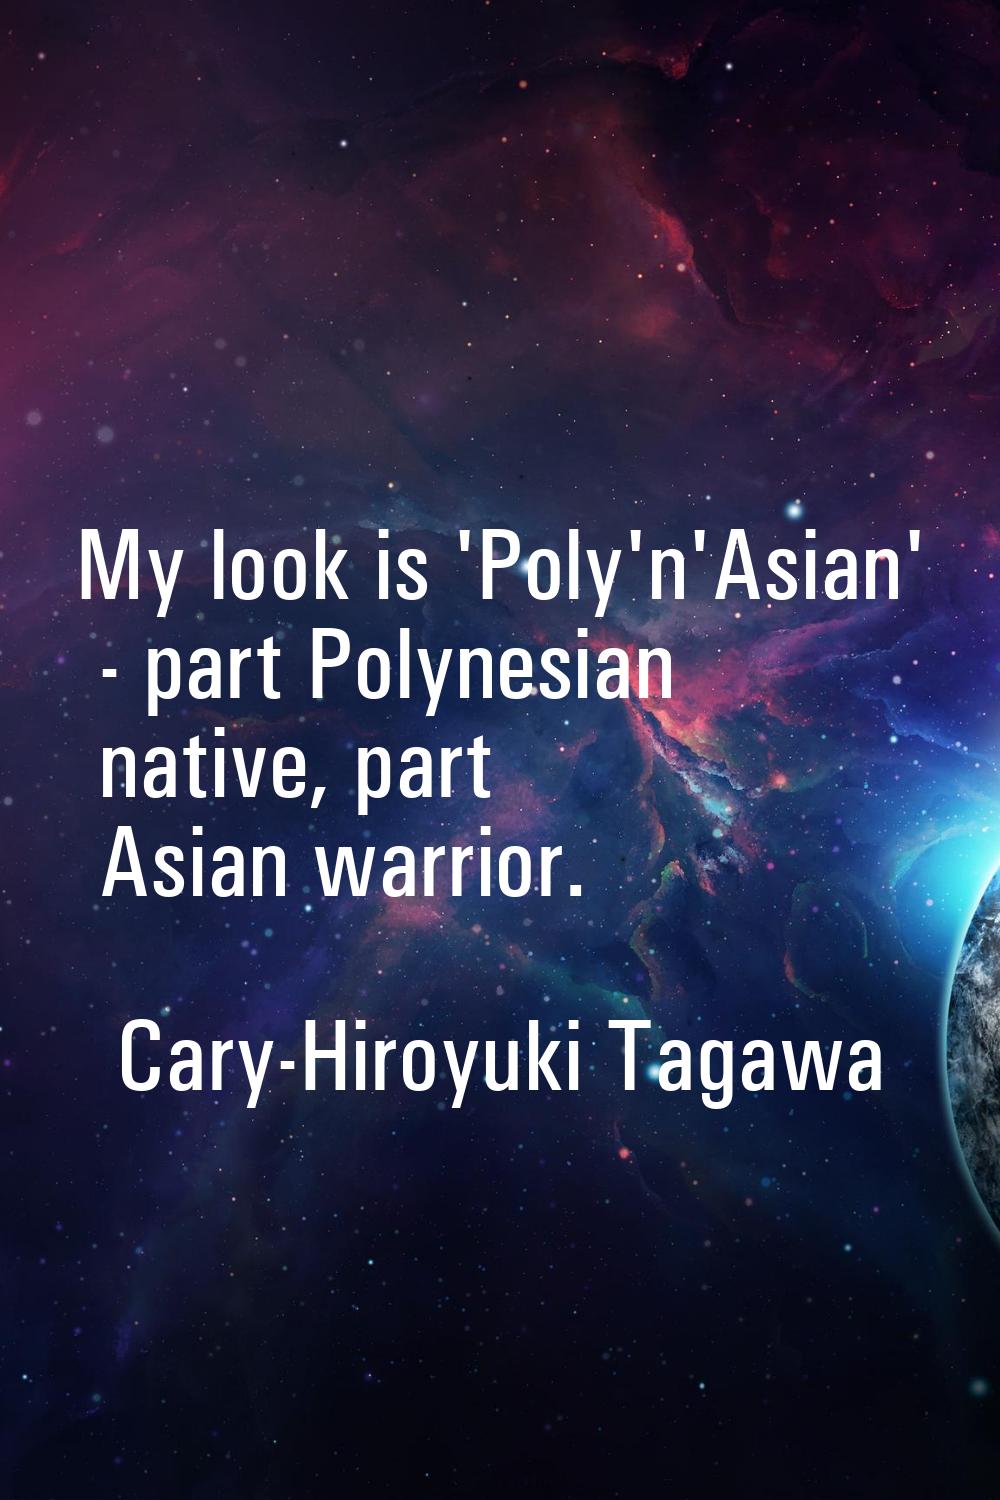 My look is 'Poly'n'Asian' - part Polynesian native, part Asian warrior.